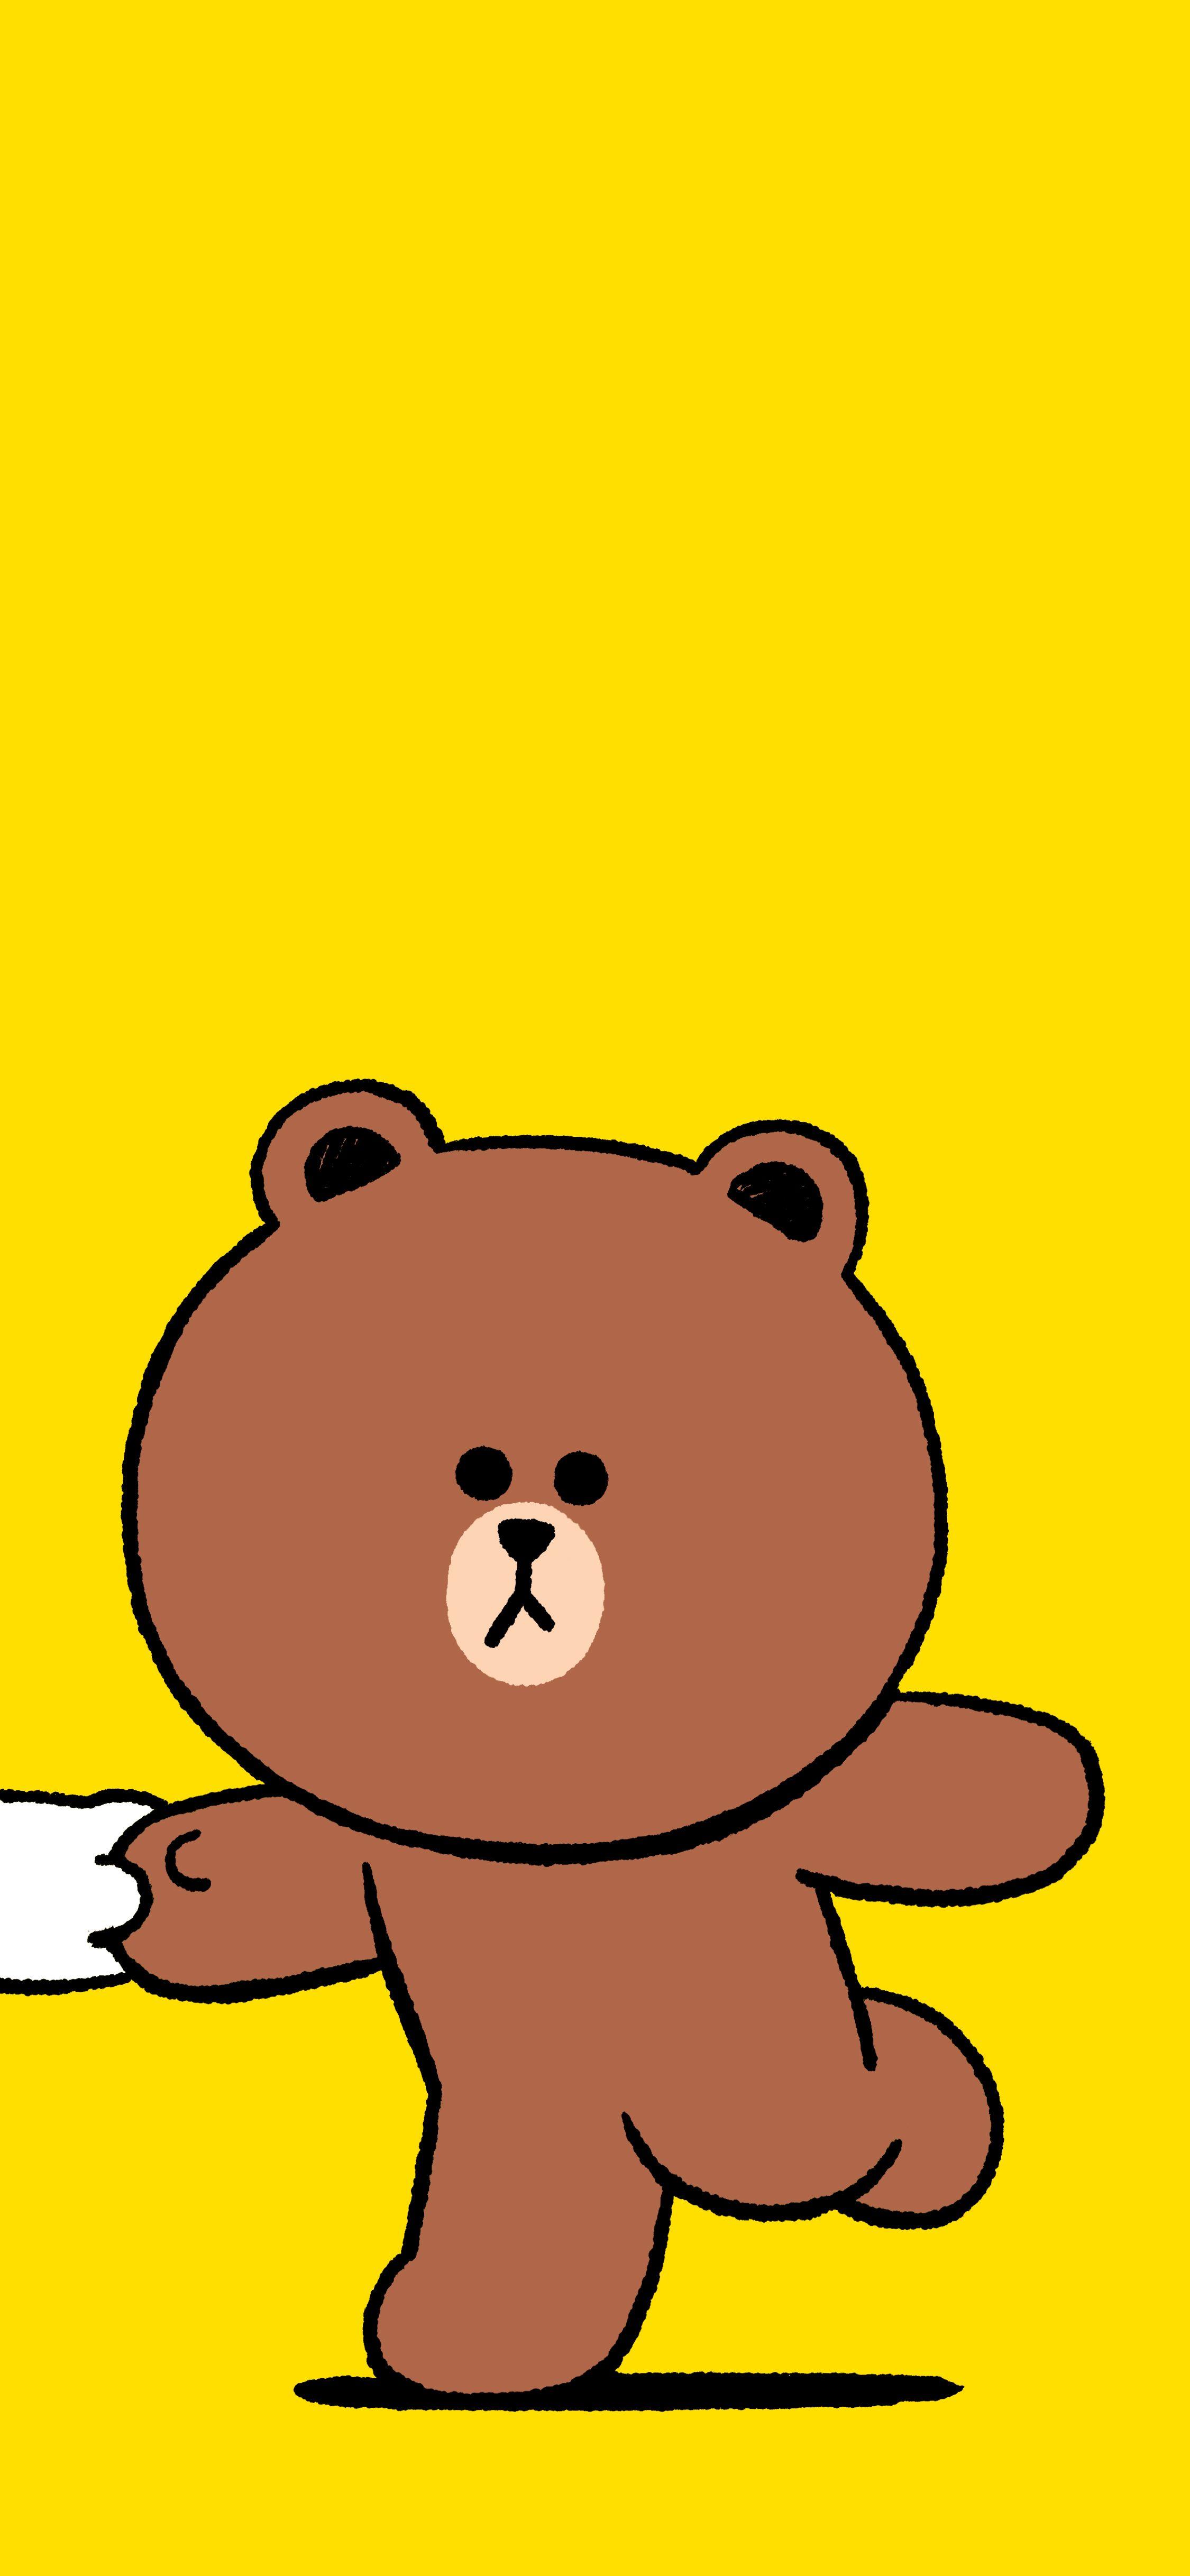 Fluffy Brown Teddy Live Wallpaper for Iphone